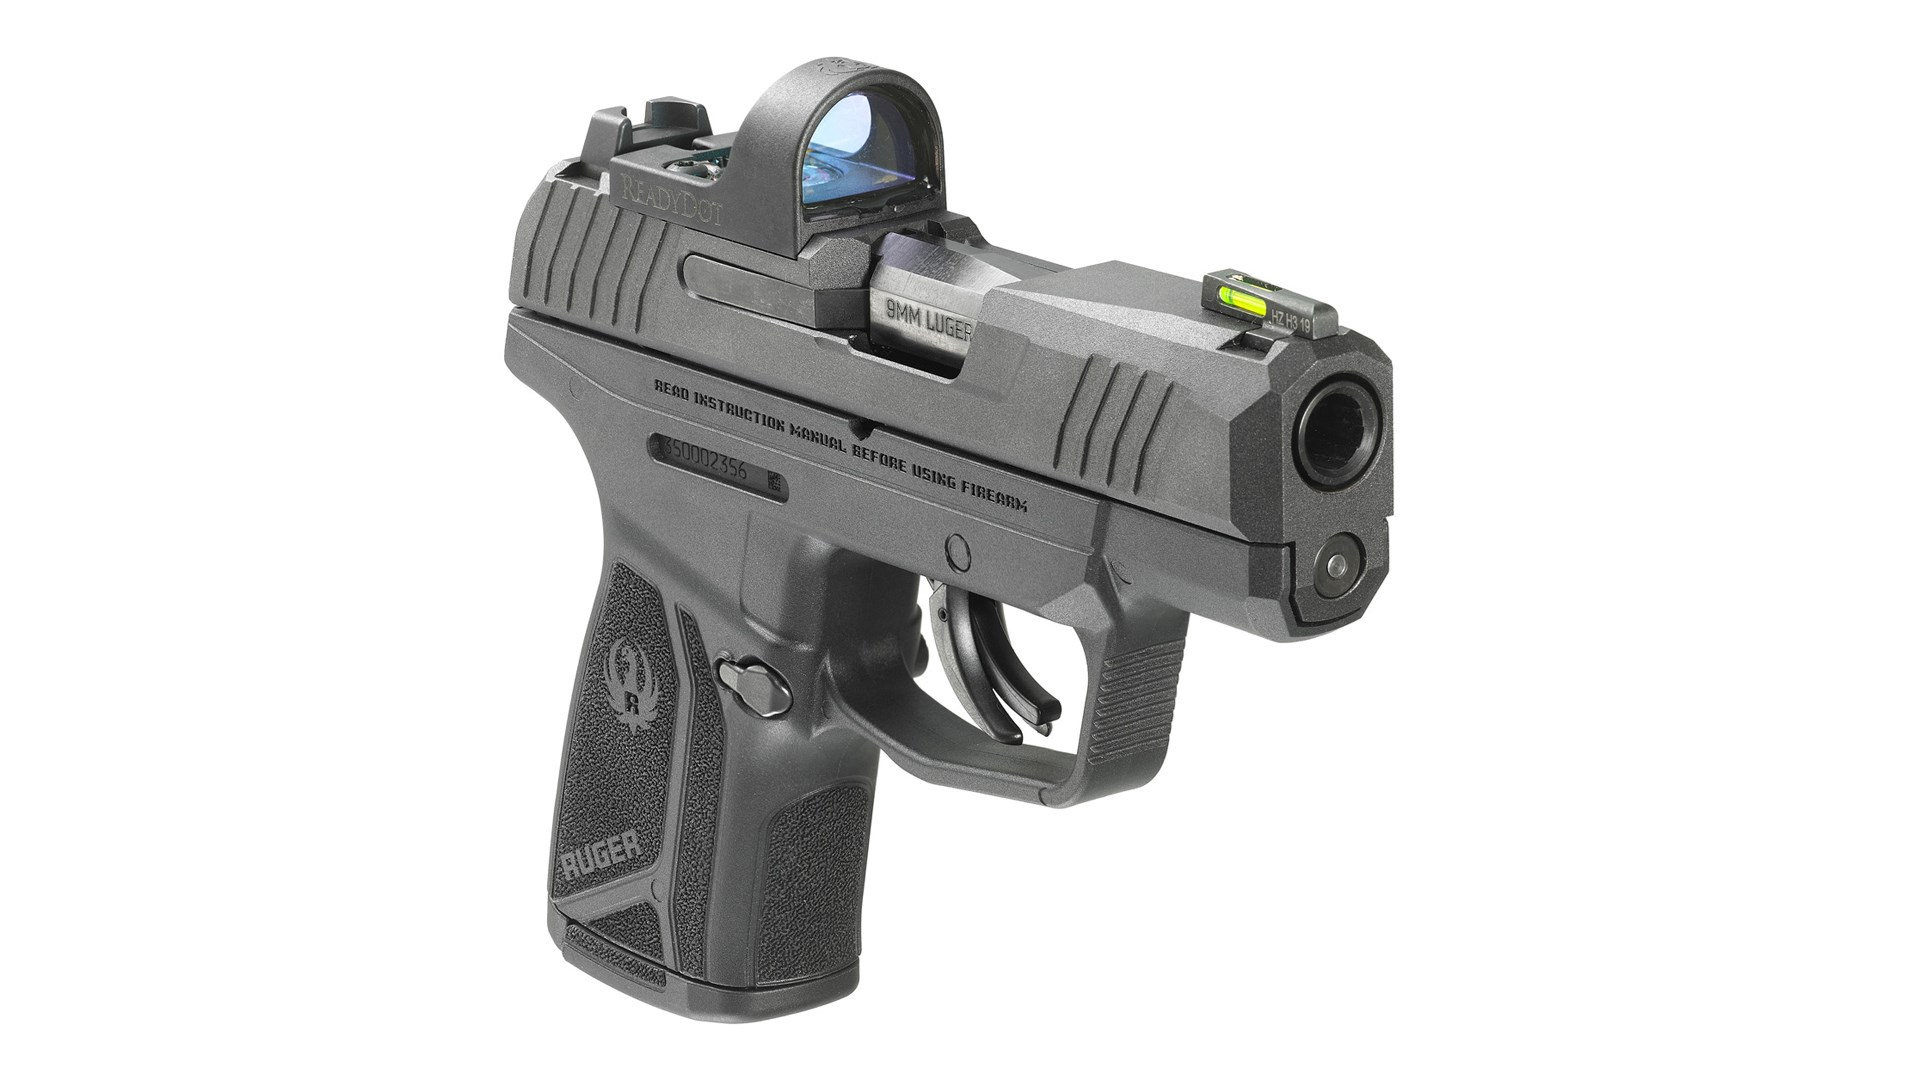 A Ruger MAX-9 handgun shown with a Ruger ReadyDot micro reflex sight mounted on top.